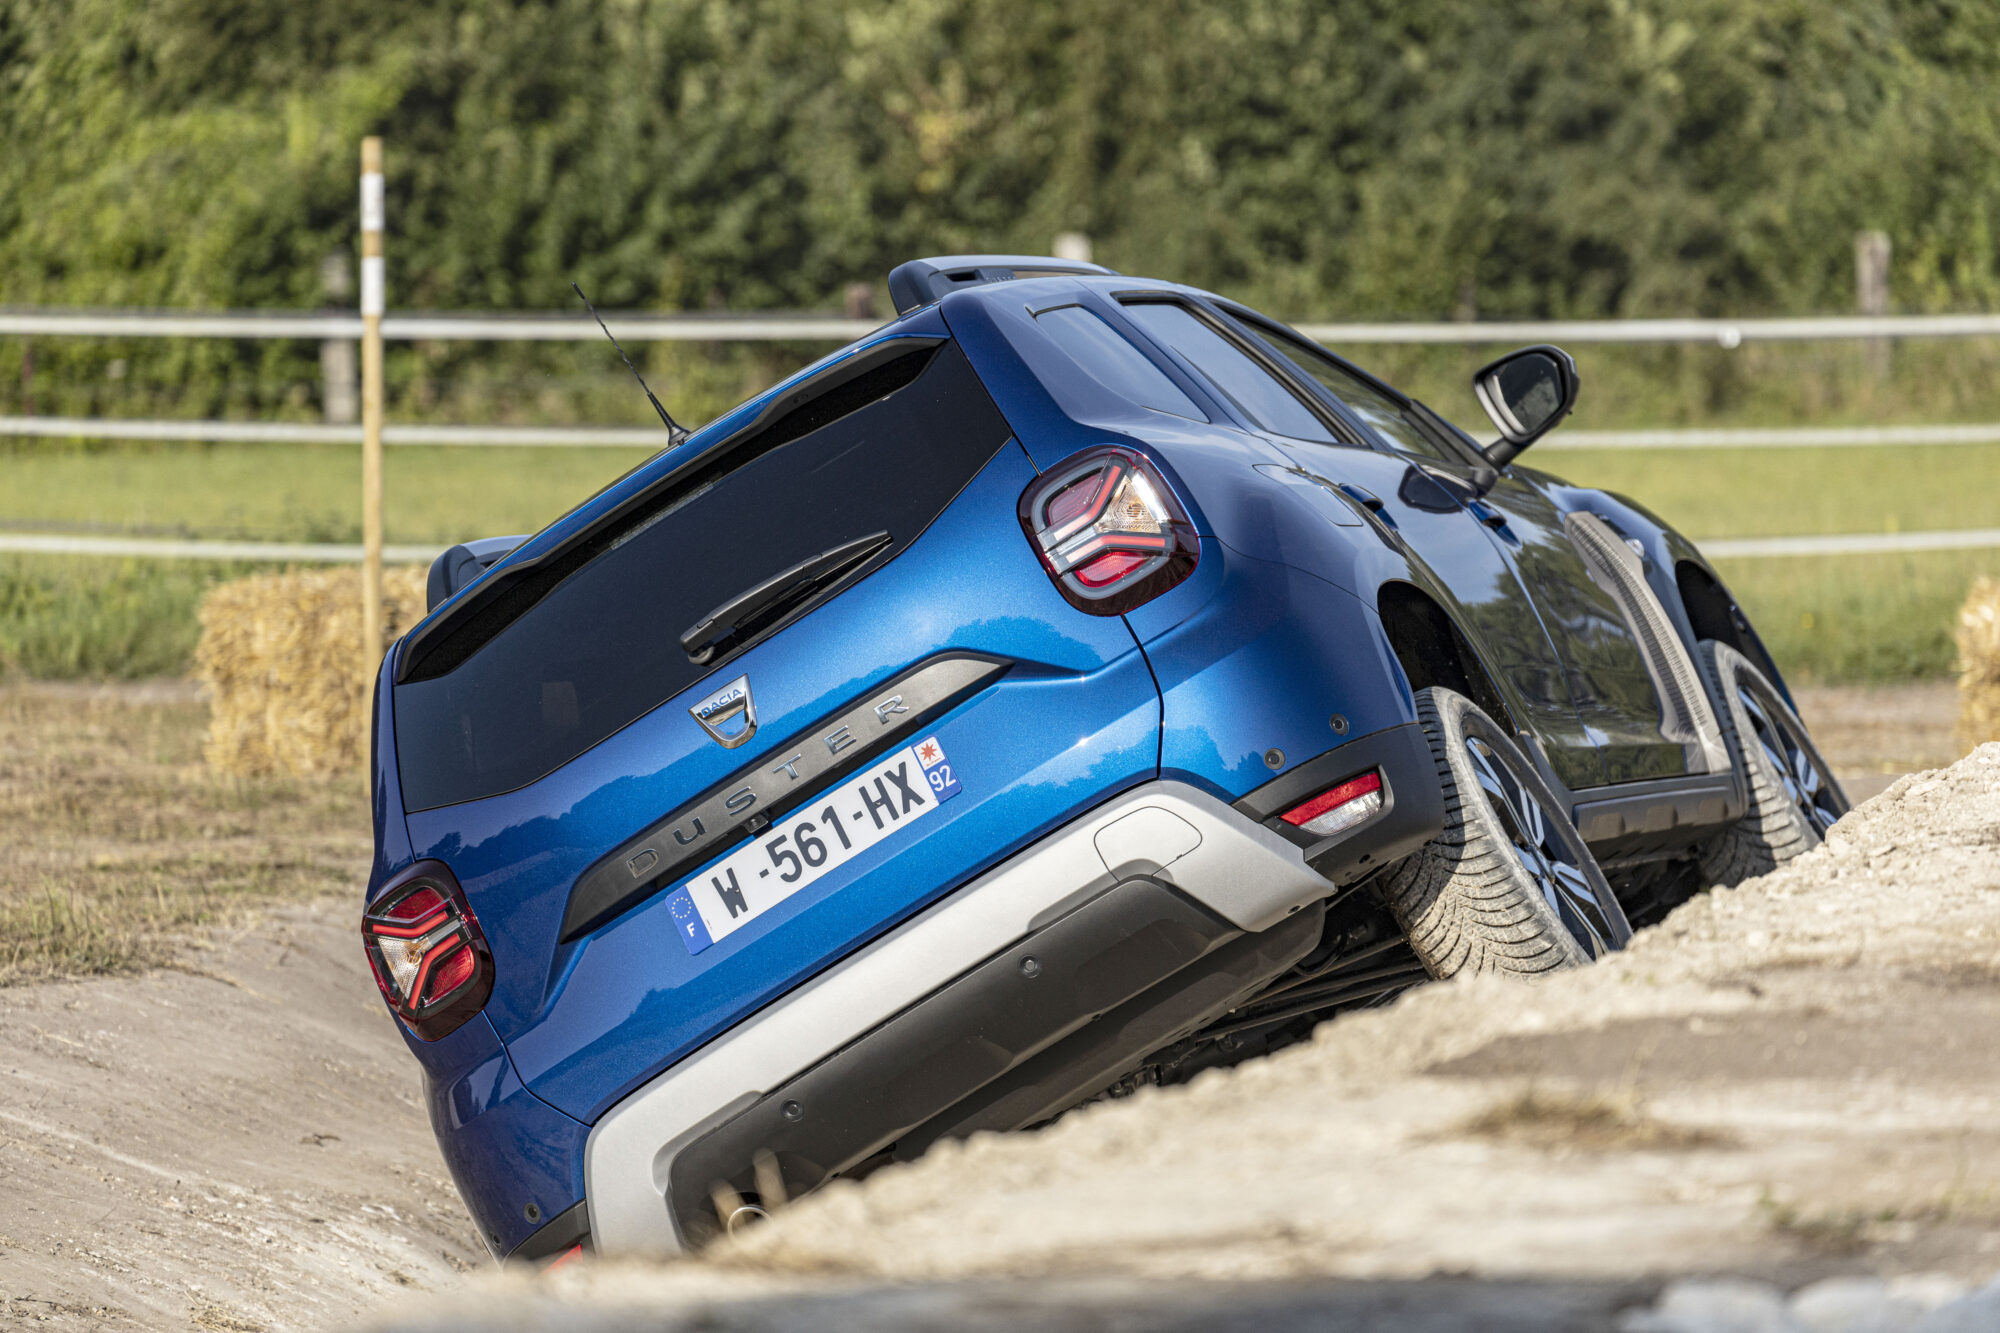 2021 - New  Dacia Duster 4X4 - Iron Blue tests drive